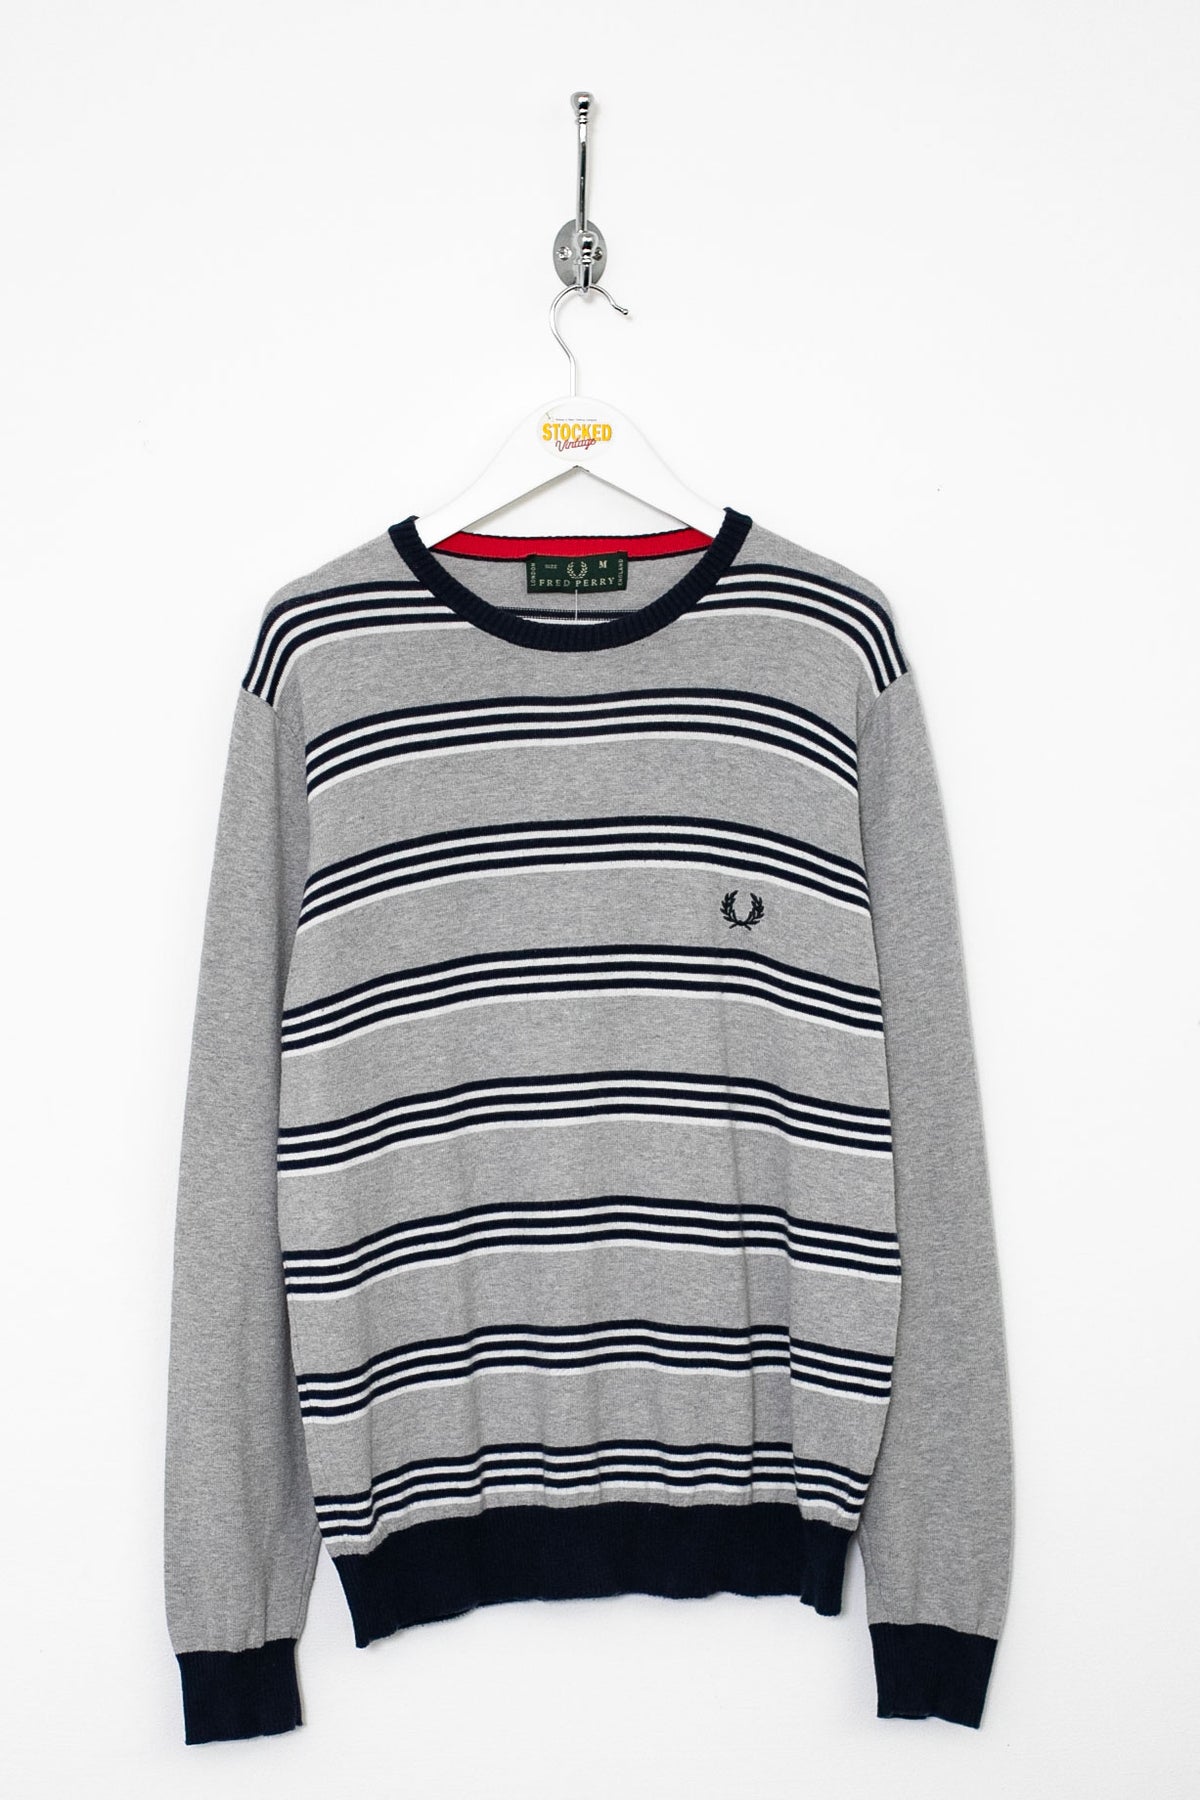 90s Fred Perry Jumper (M)